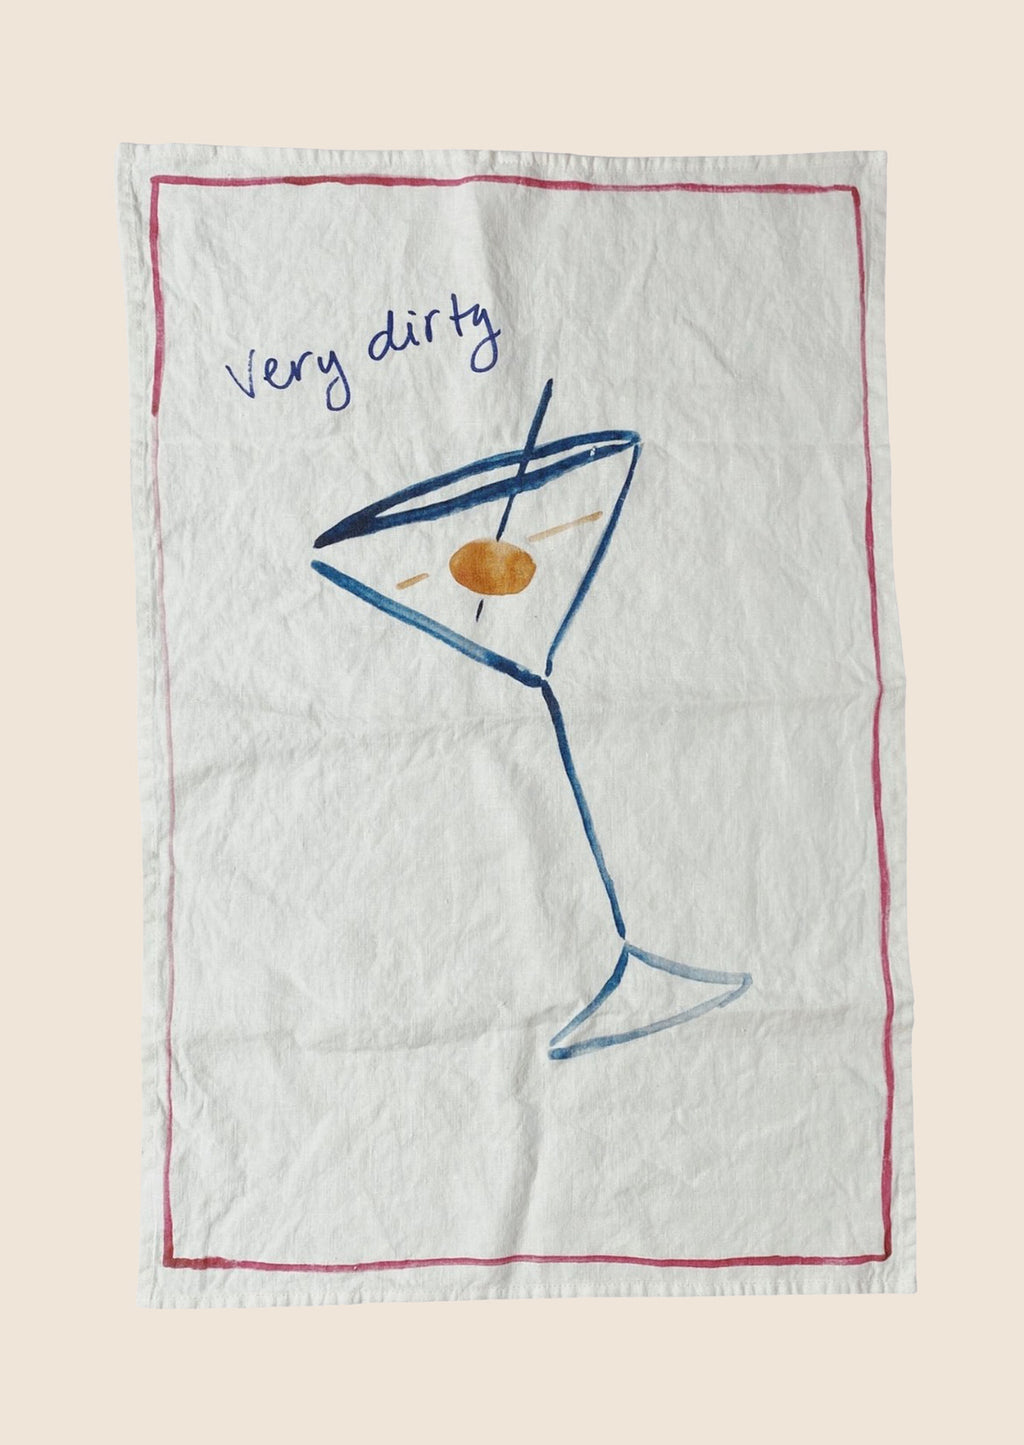 Very Dirty Martini: A white linen tea towel with Very Dirty Martini graphic and text.